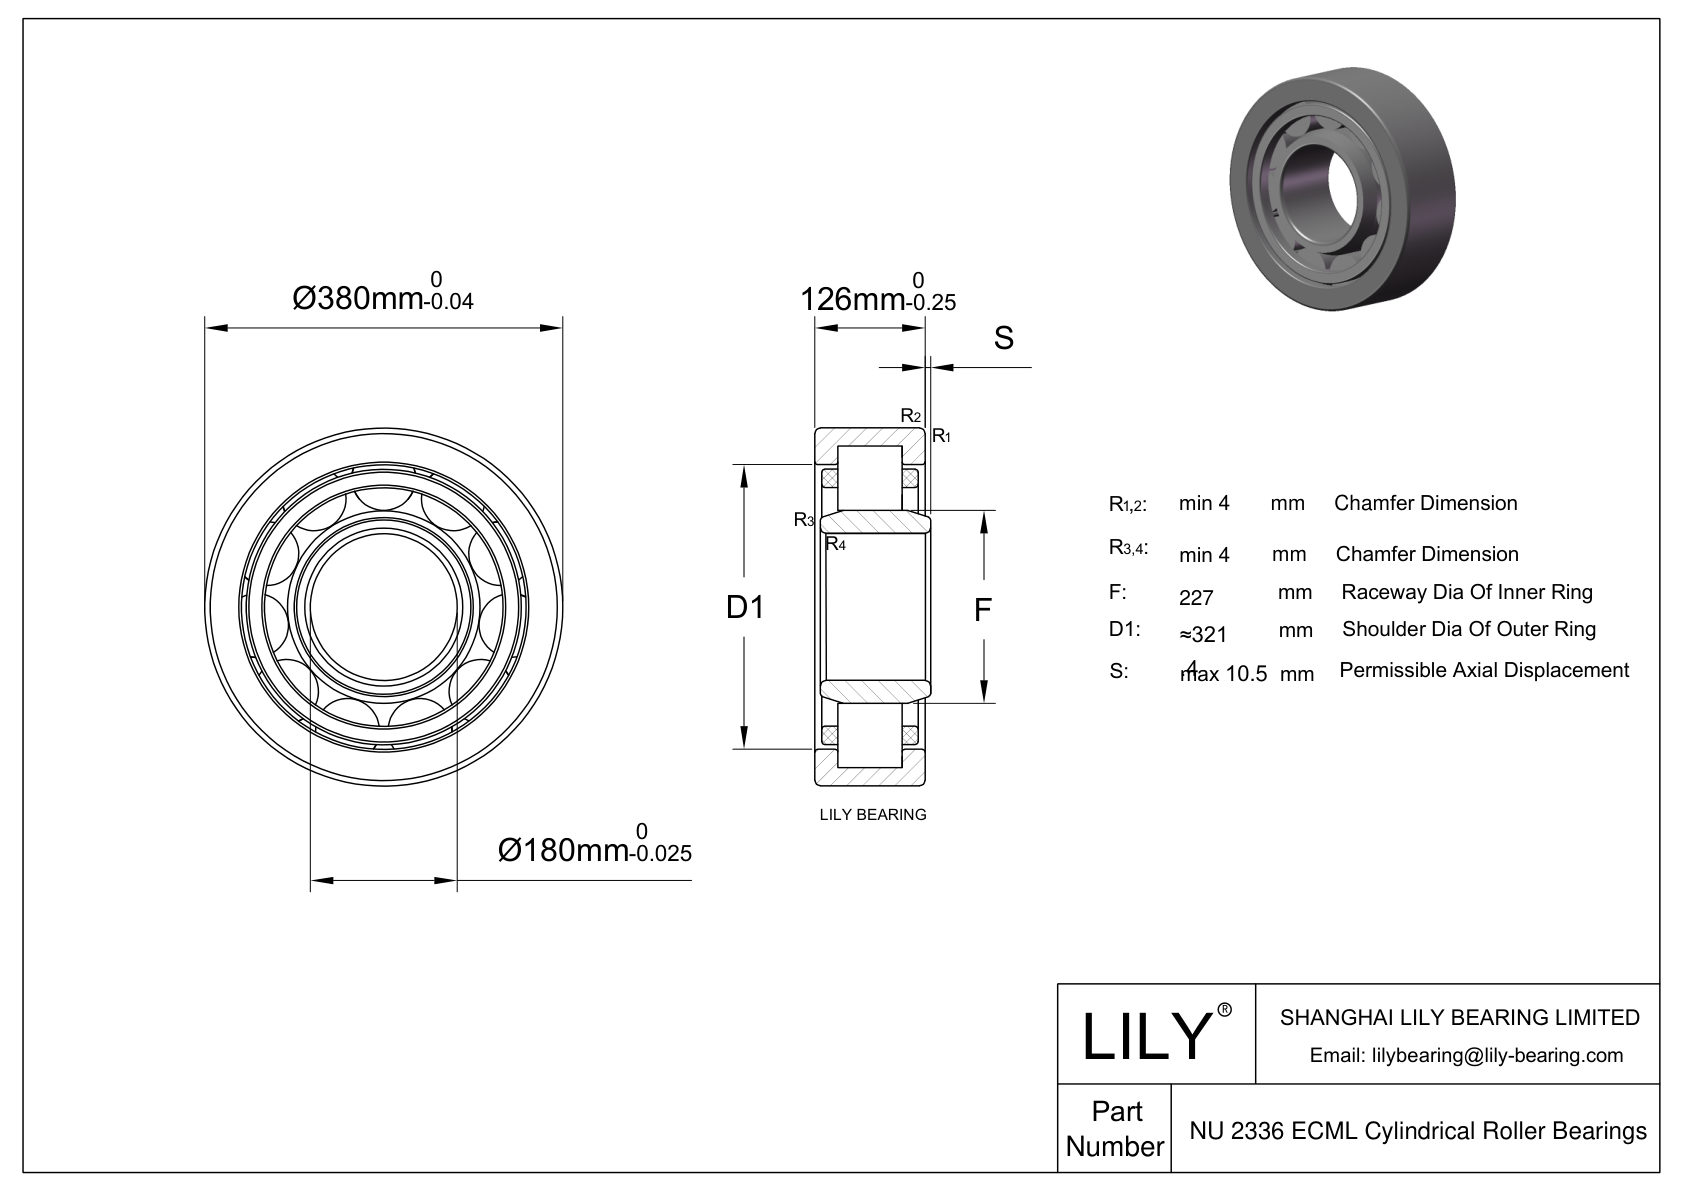 NU 2336 ECML Single Row Cylindrical Roller Bearings With Inner Ring cad drawing